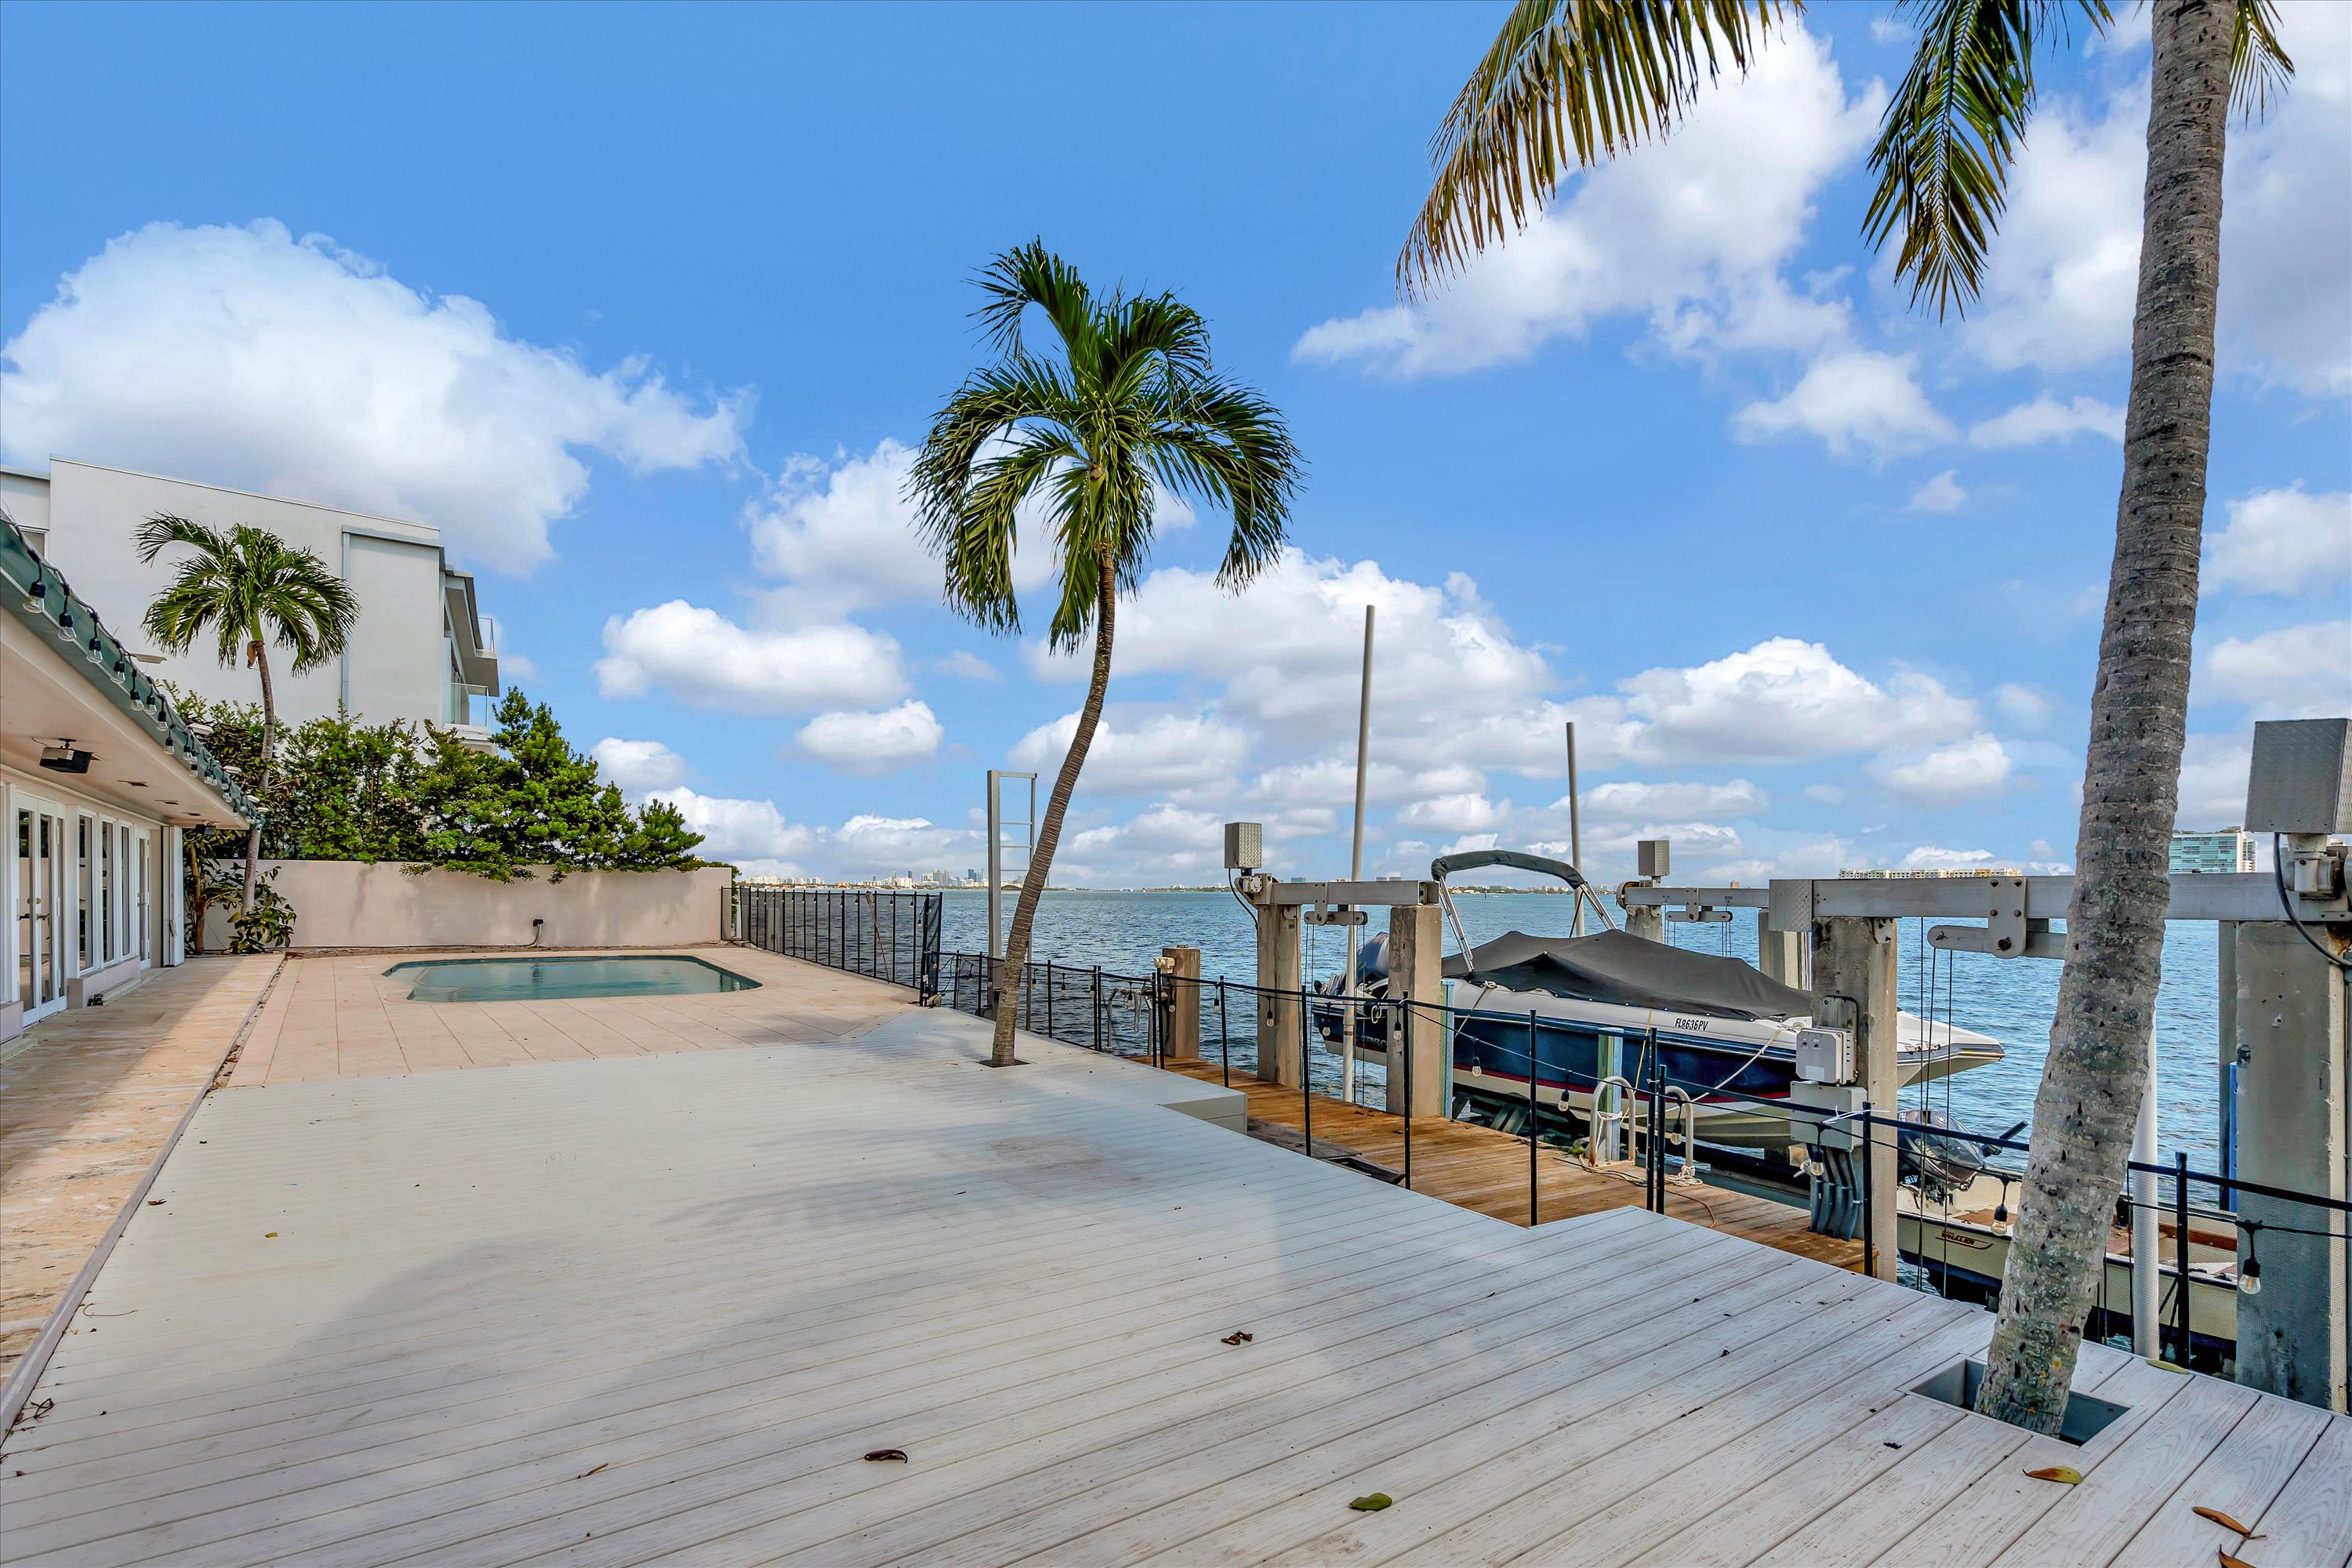 Beautiful South Grove Bayside, Miami, FL house showcasing the best property management services